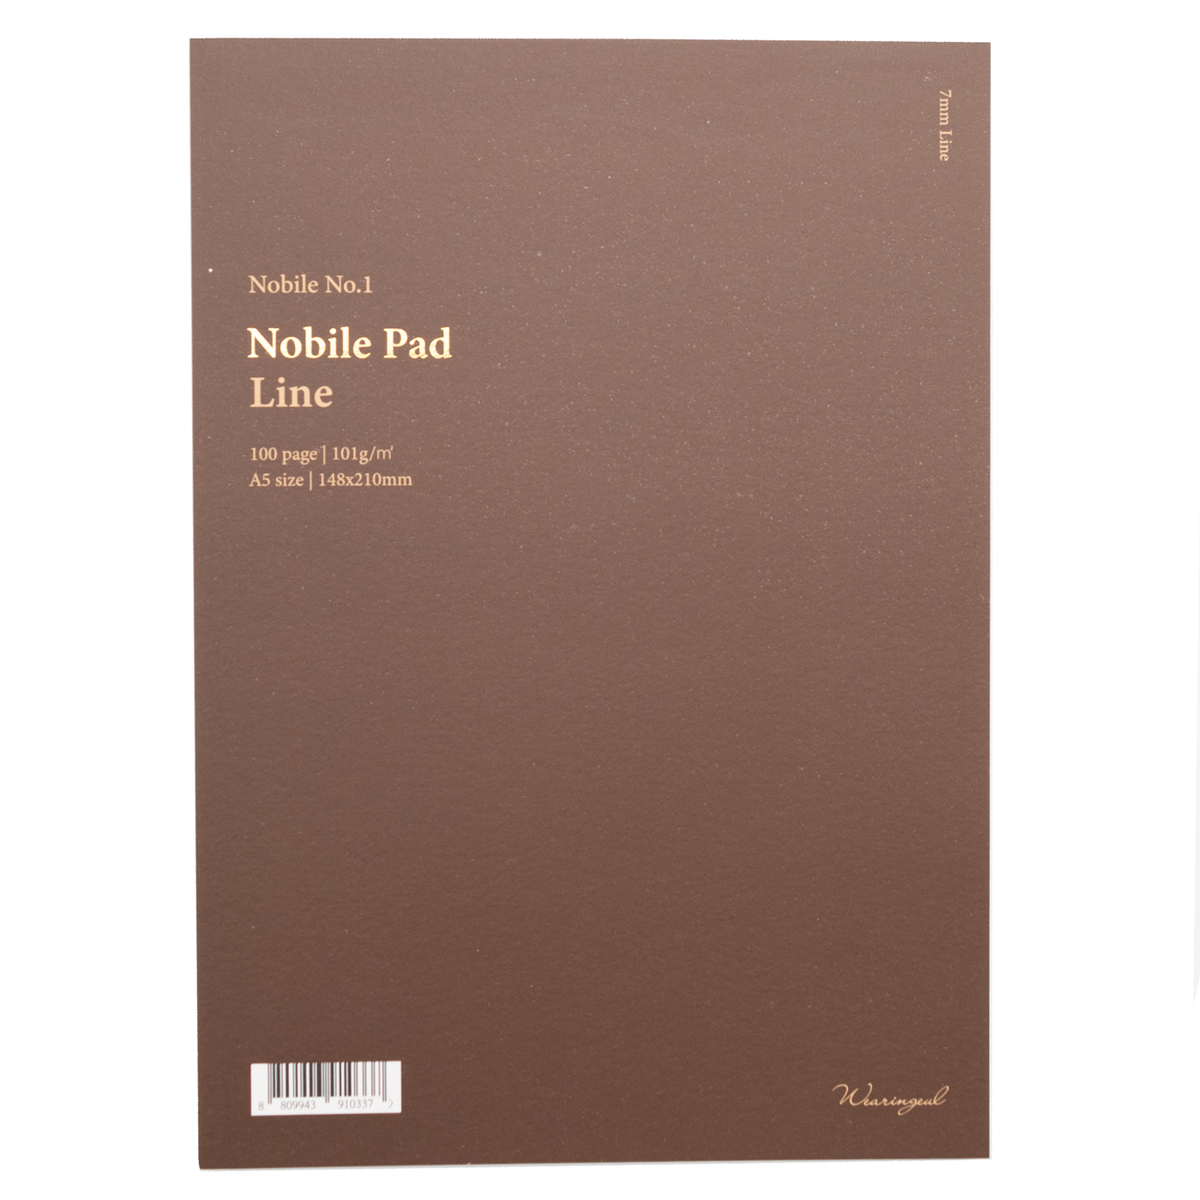 Wearingeul Nobile No.1 Paper Pad A5 Lined